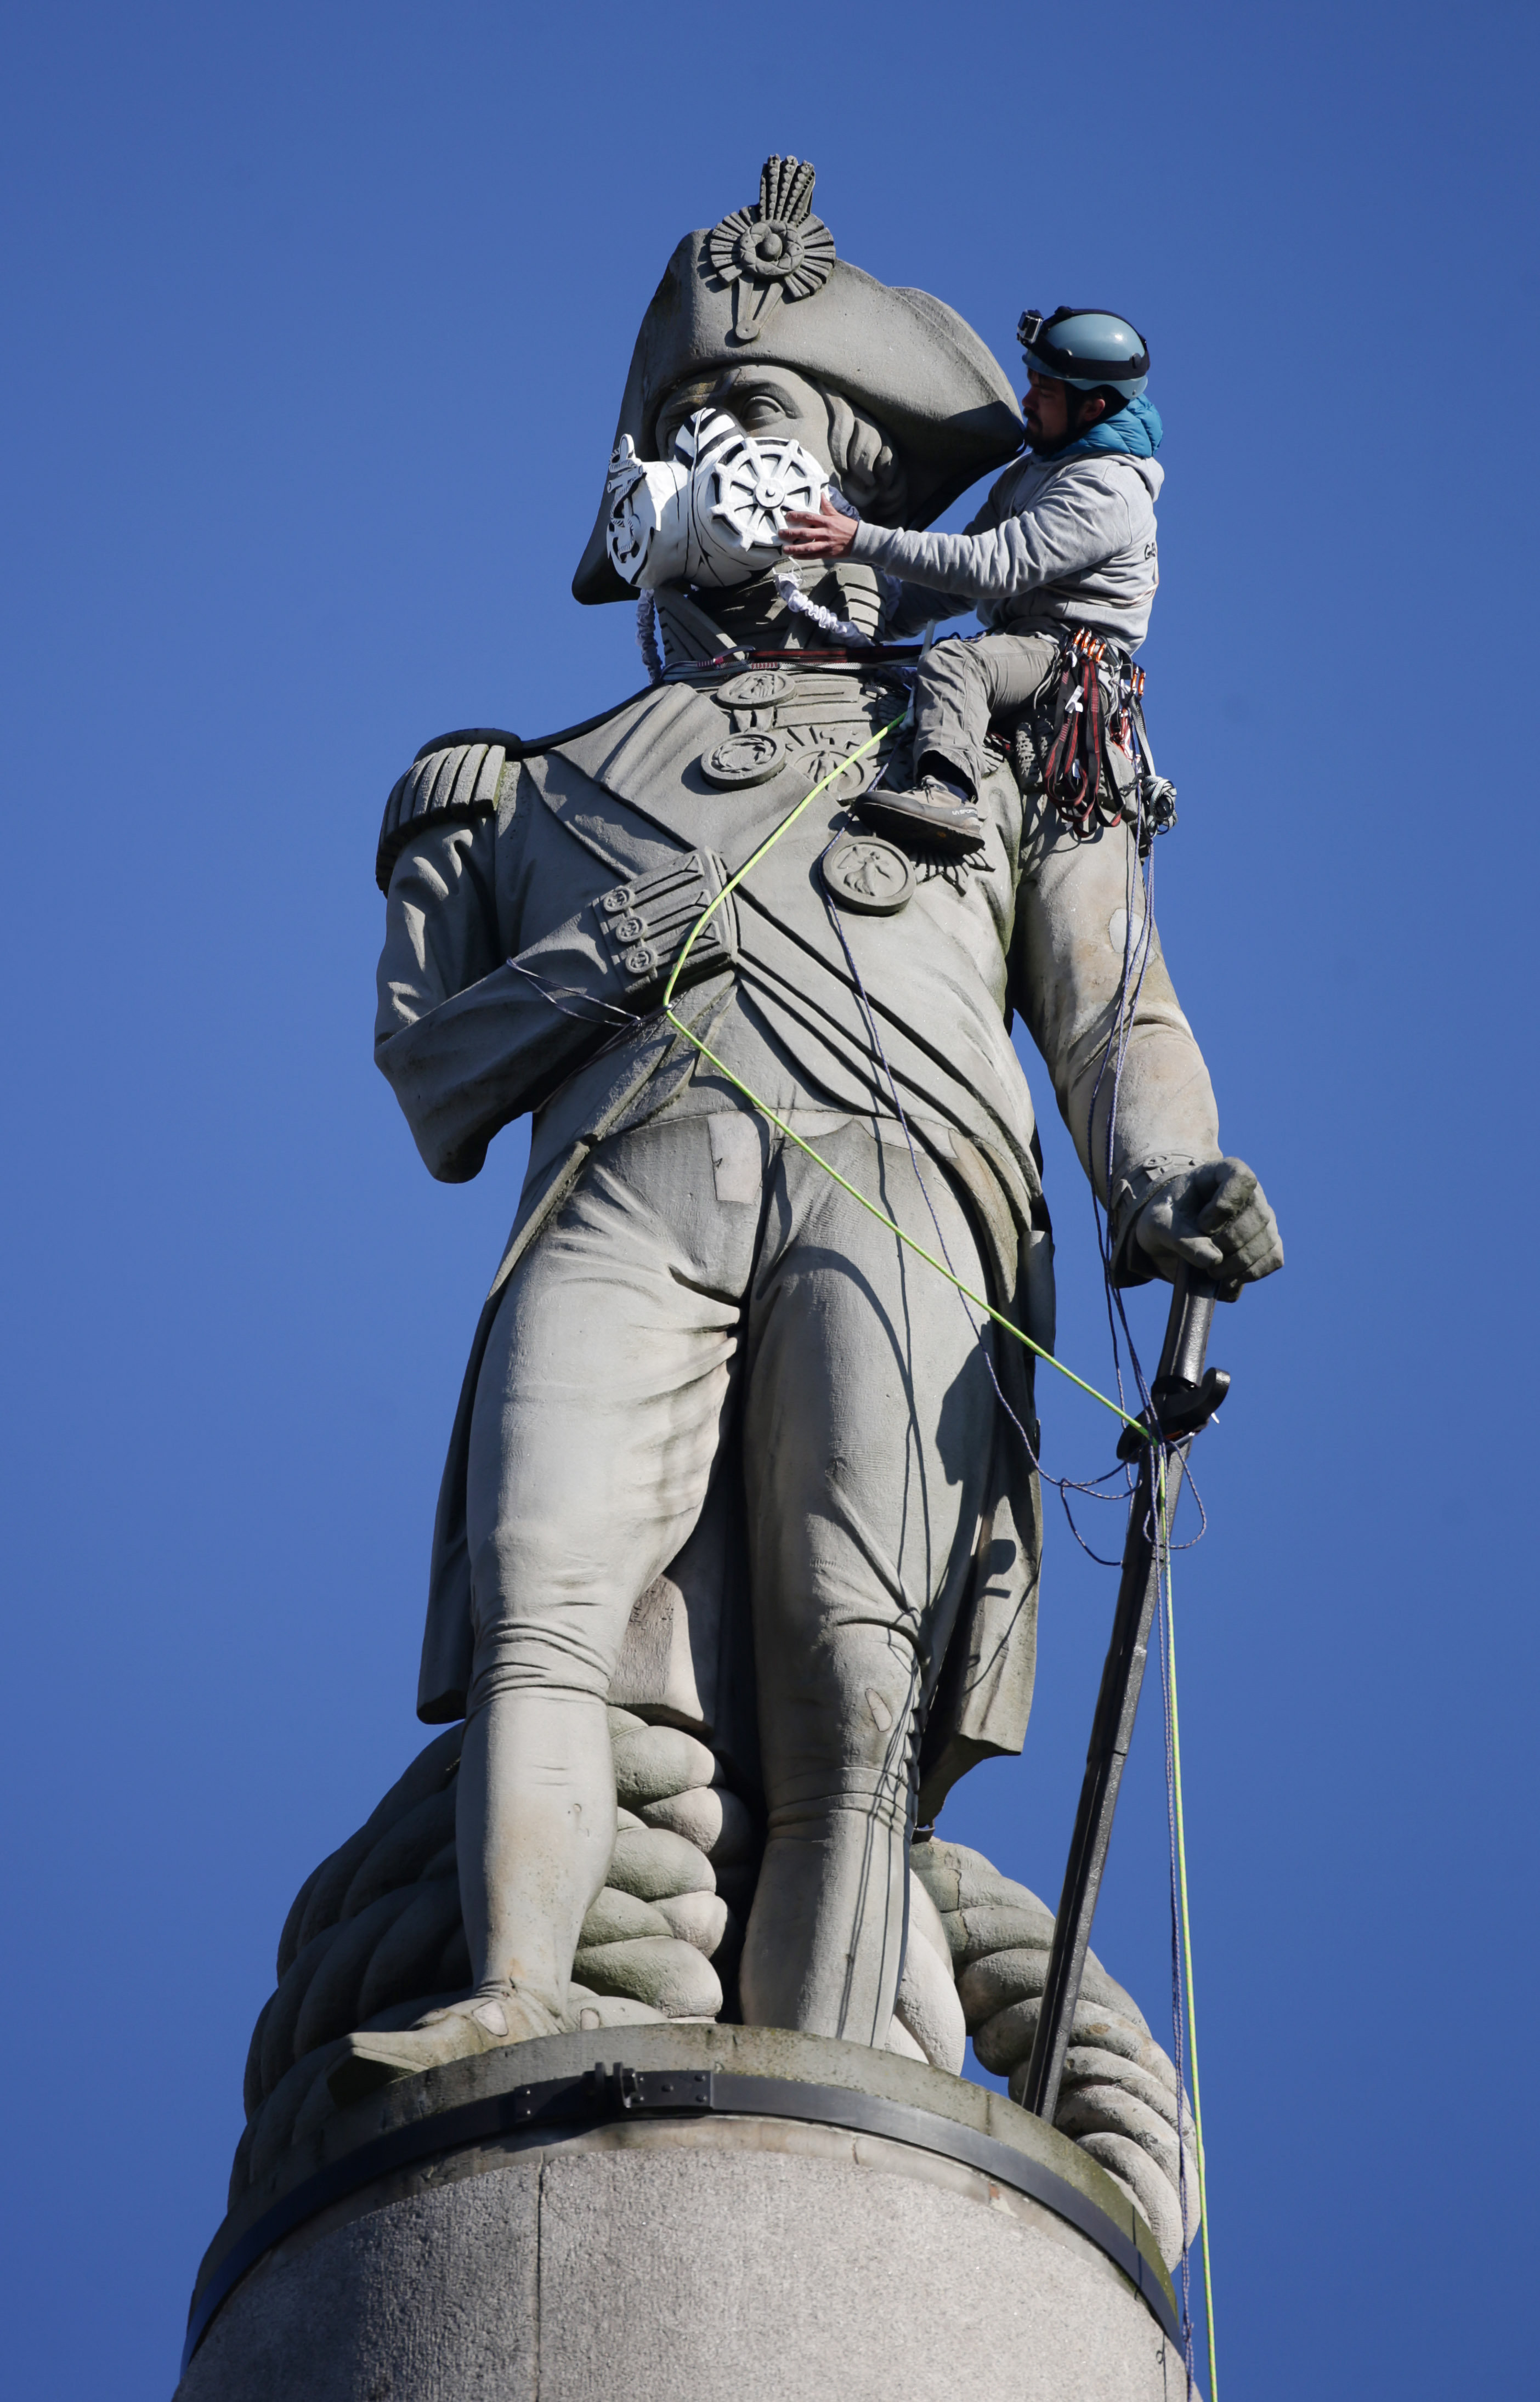 <strong>A Greenpeace stunt sees a mask placed on Trafalgar Square's iconic Nelson's Column</strong>